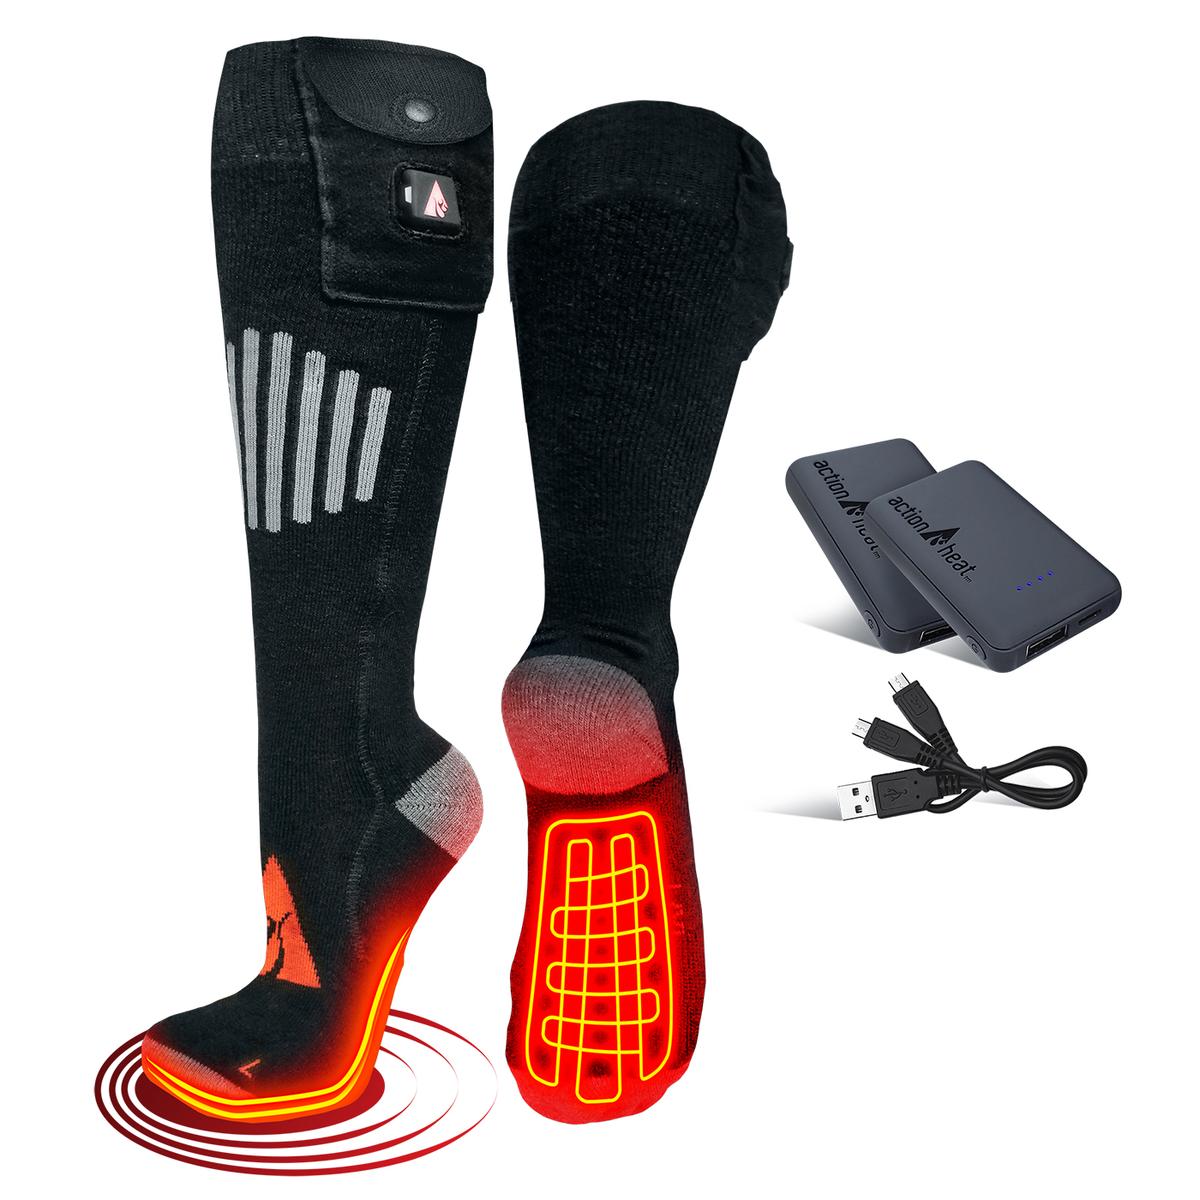 ActionHeat 5V Wool Battery Heated Socks - Front